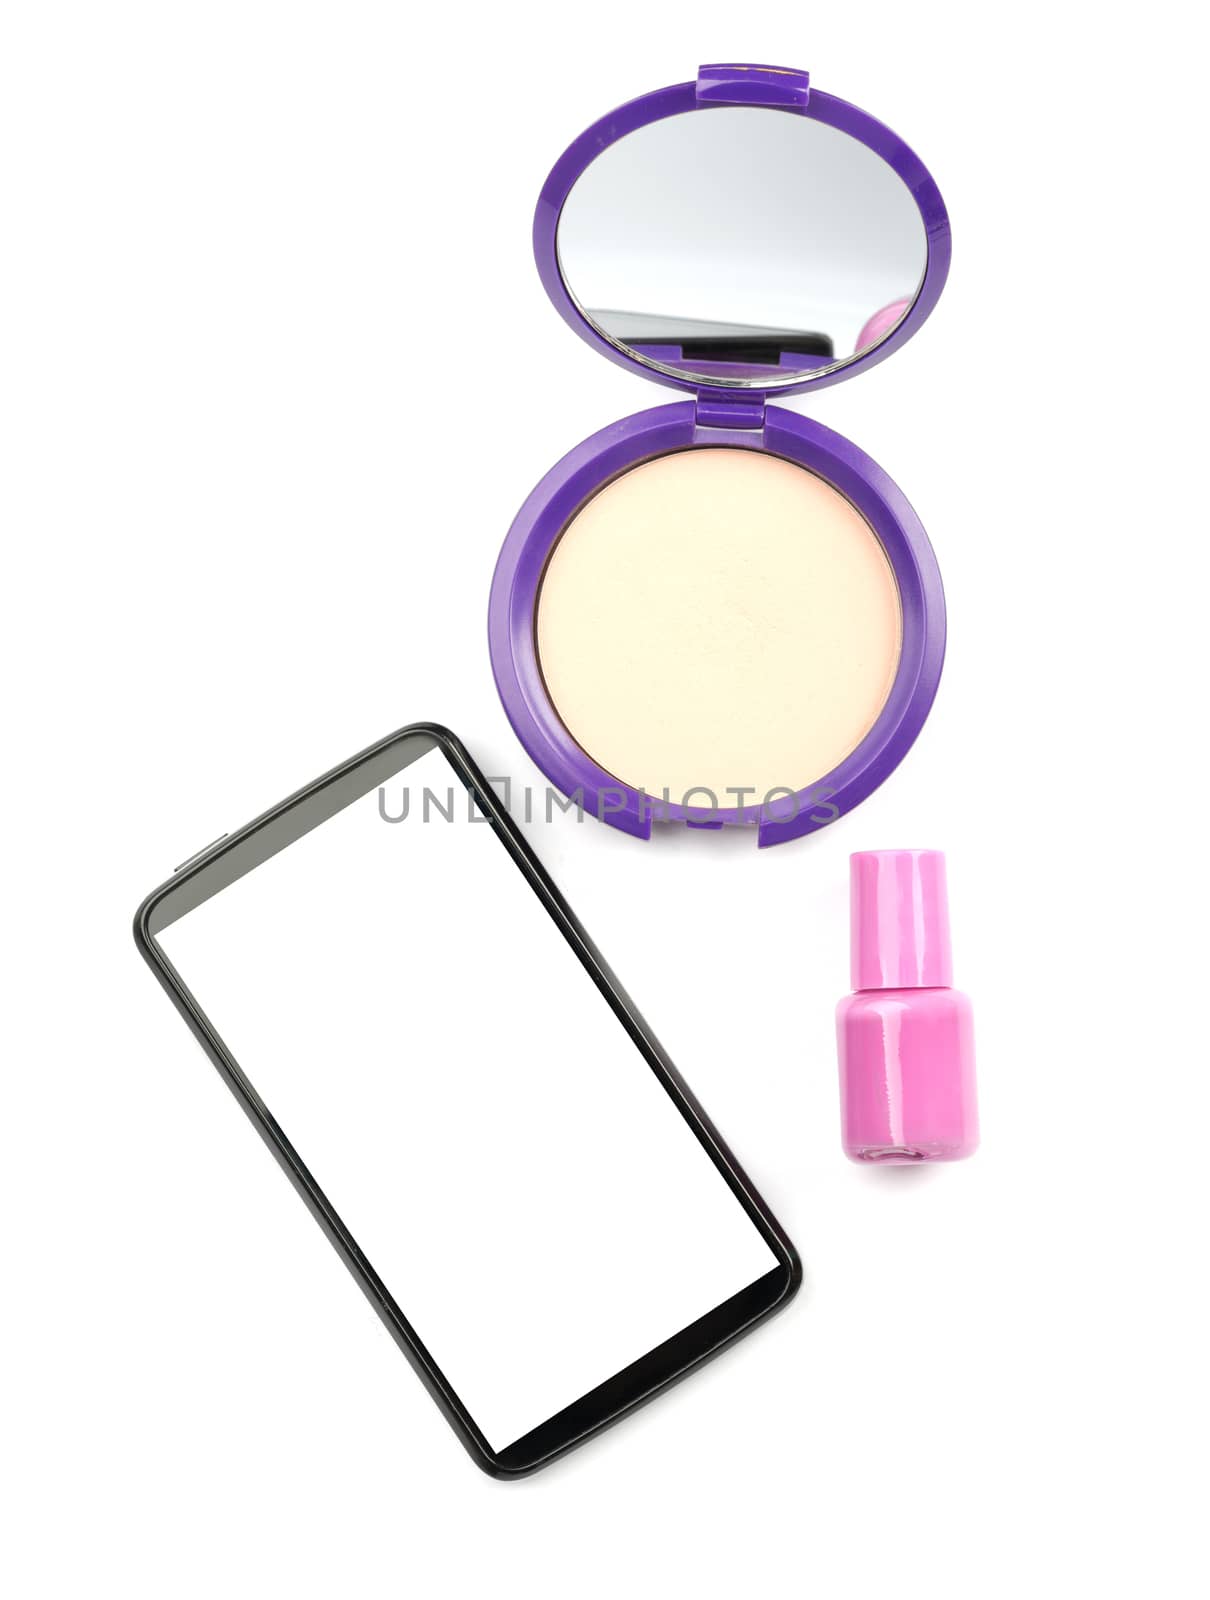 Smartphone with cosmetics on isolated white background